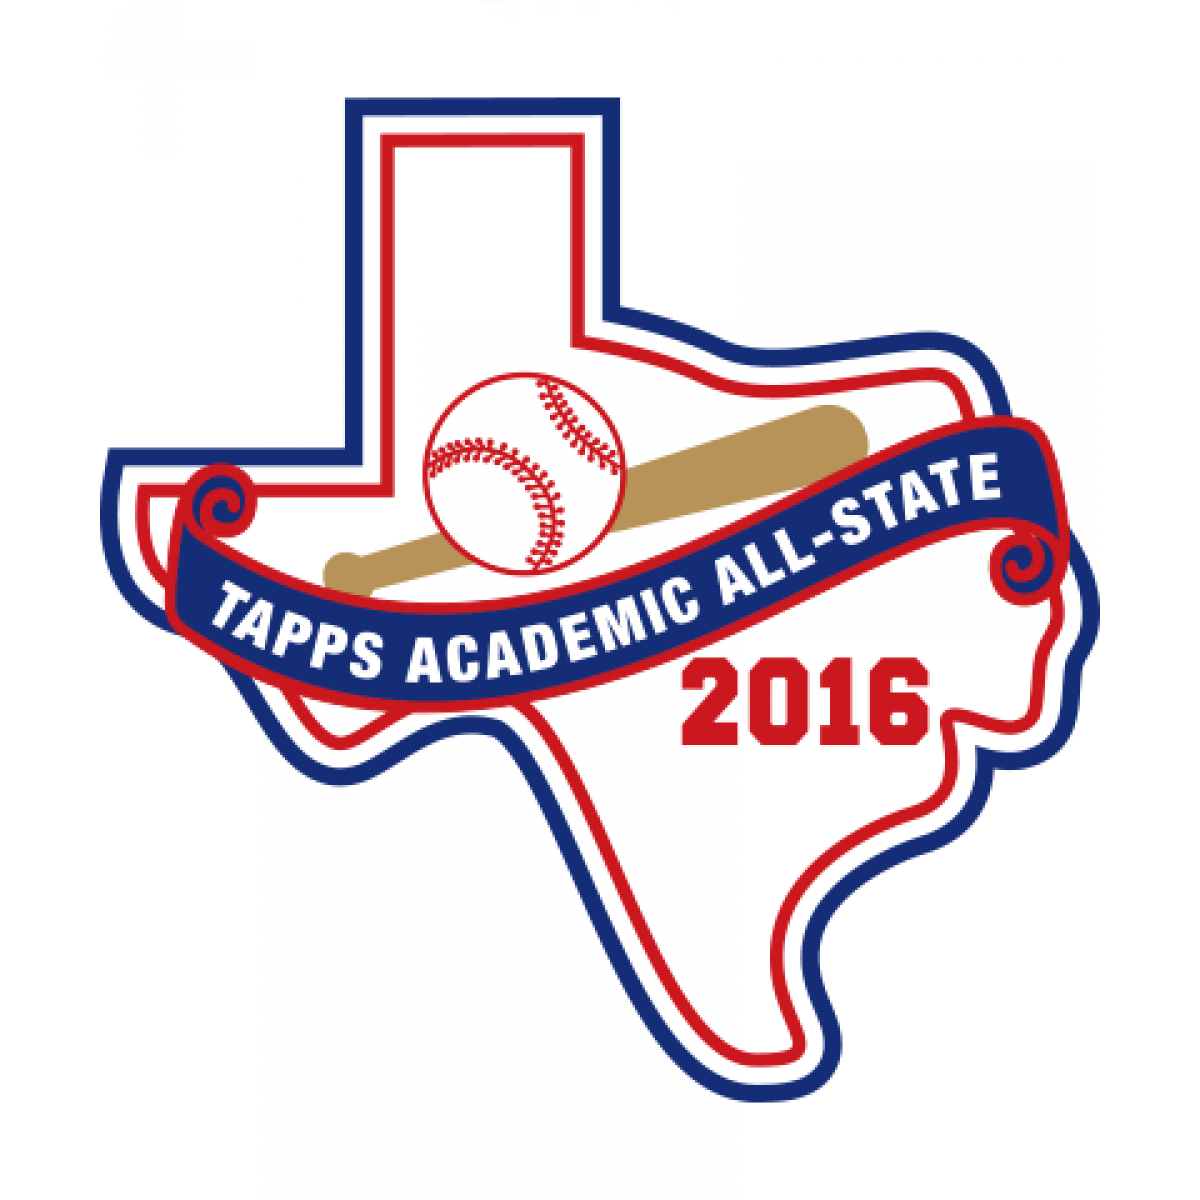 Felt 2016 TAPPS Baseball Academic All-State Patch